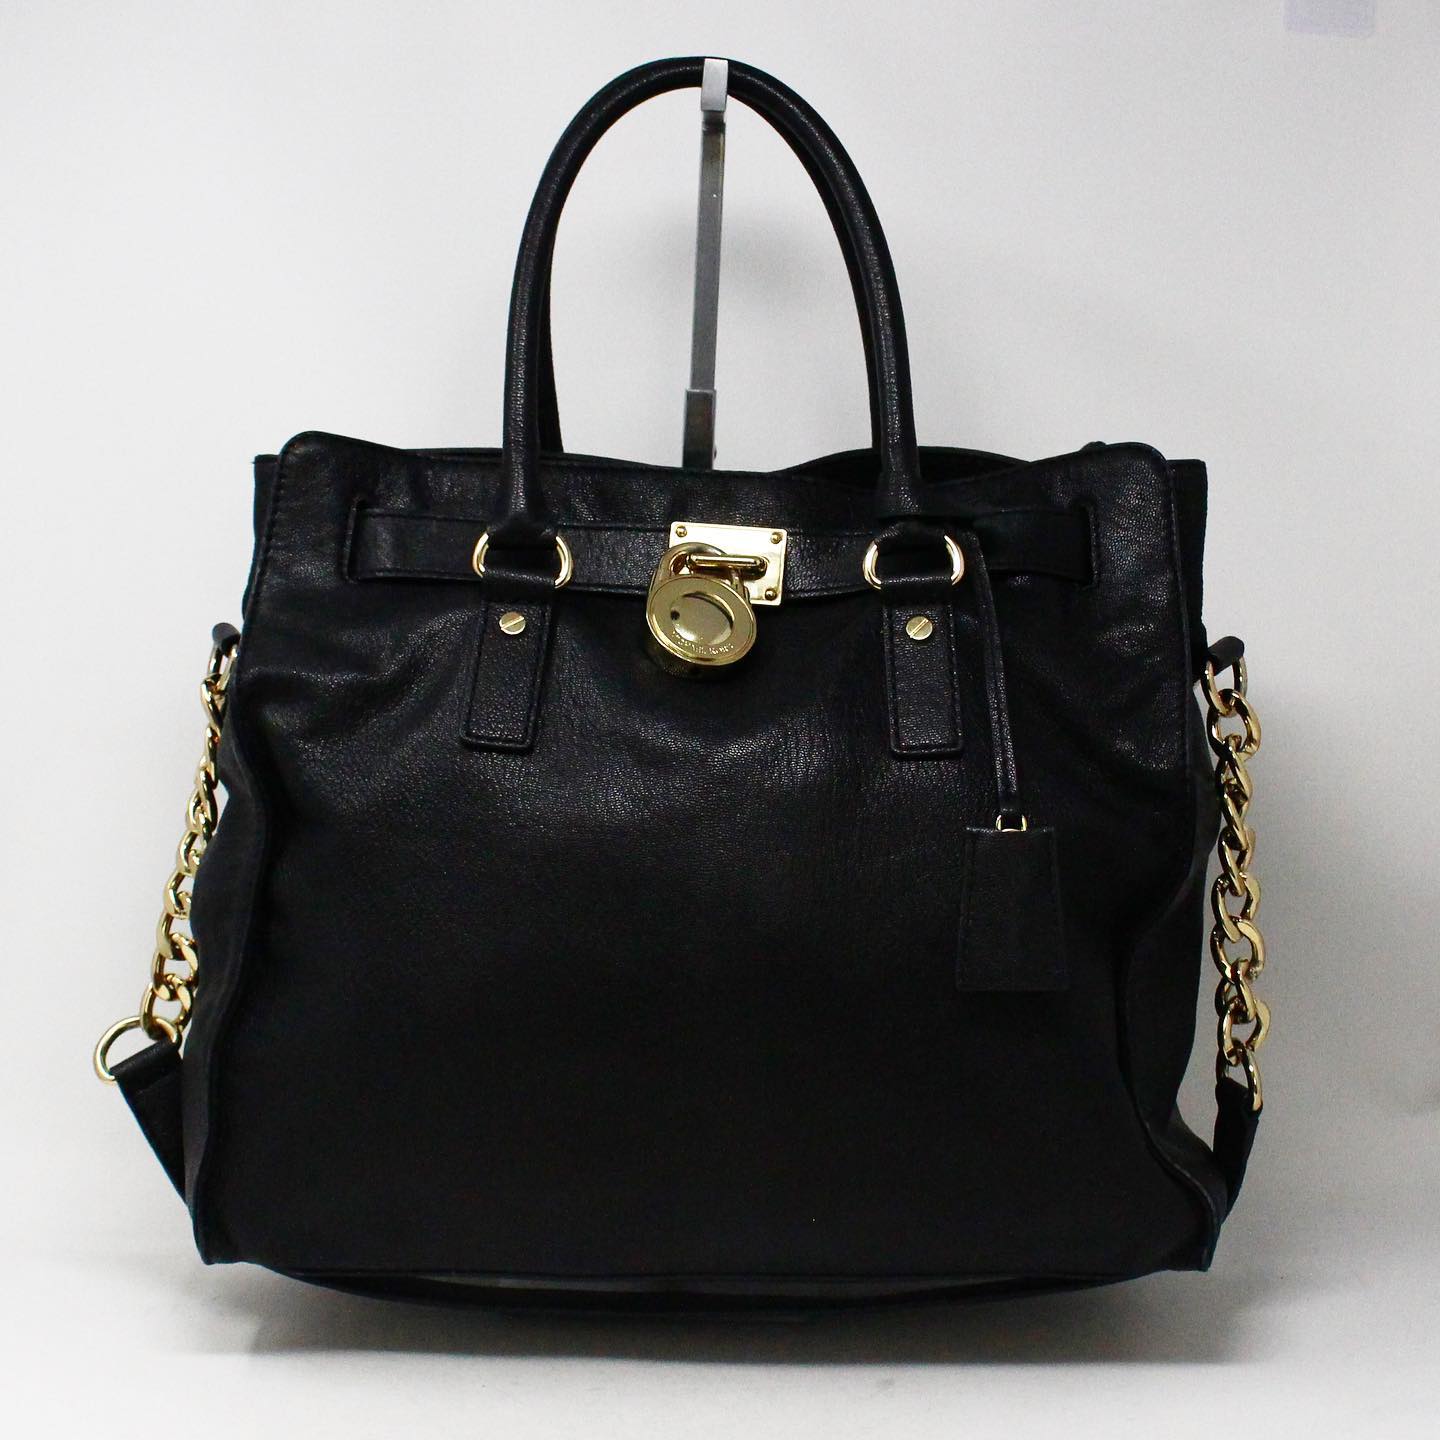 MICHAEL KORS 30935 Black Leather Lock Tote  ALL YOUR BLISS